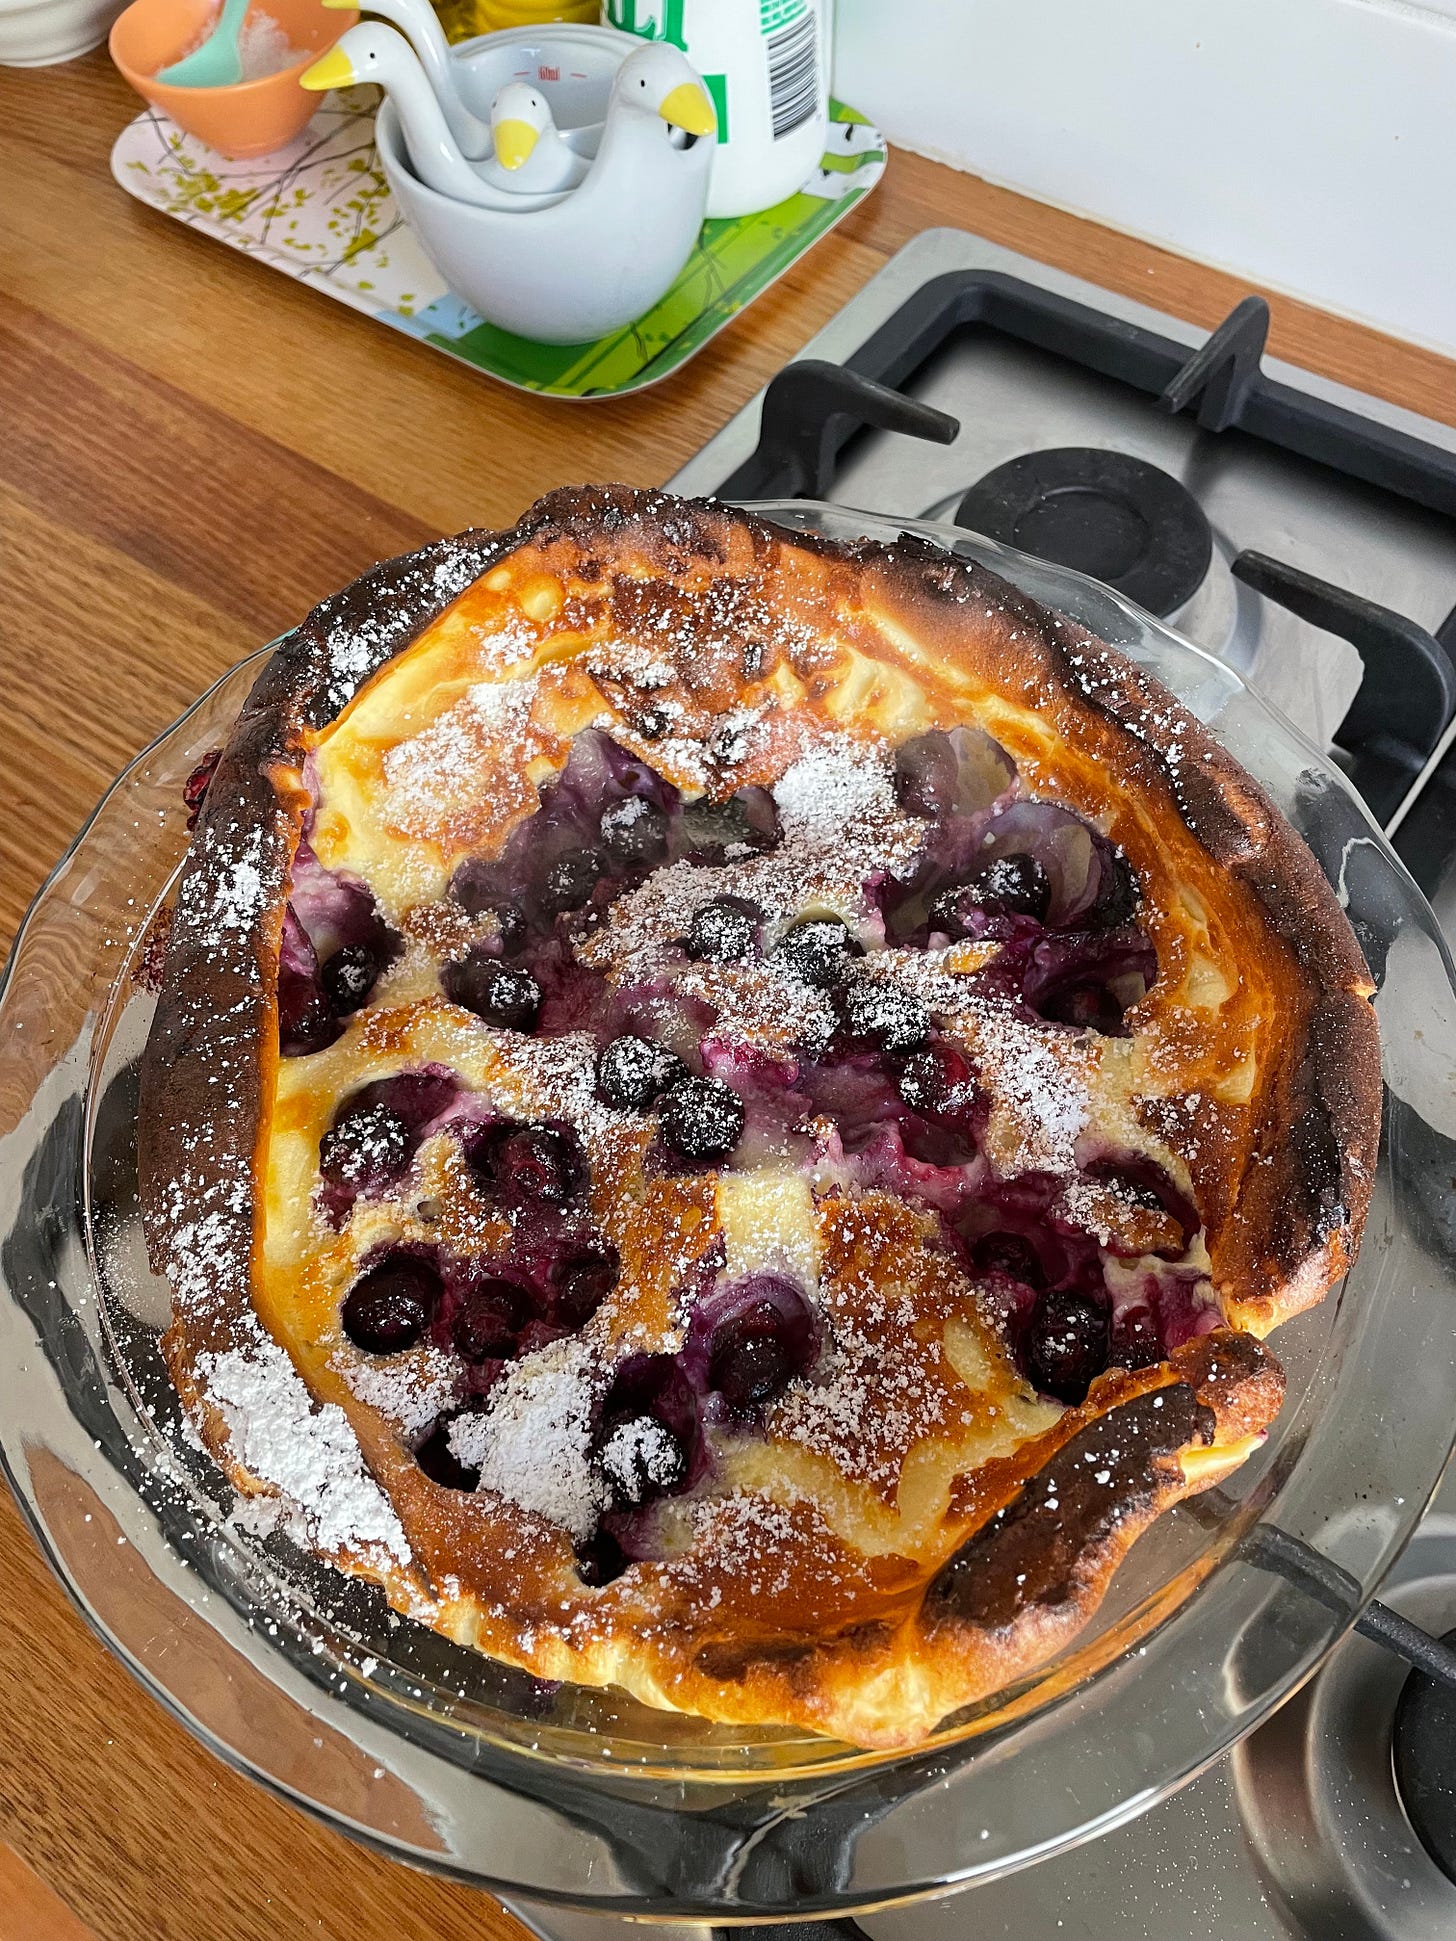 Blueberry dutch baby fresh out of the oven, sprinkled wiht icing sugar.